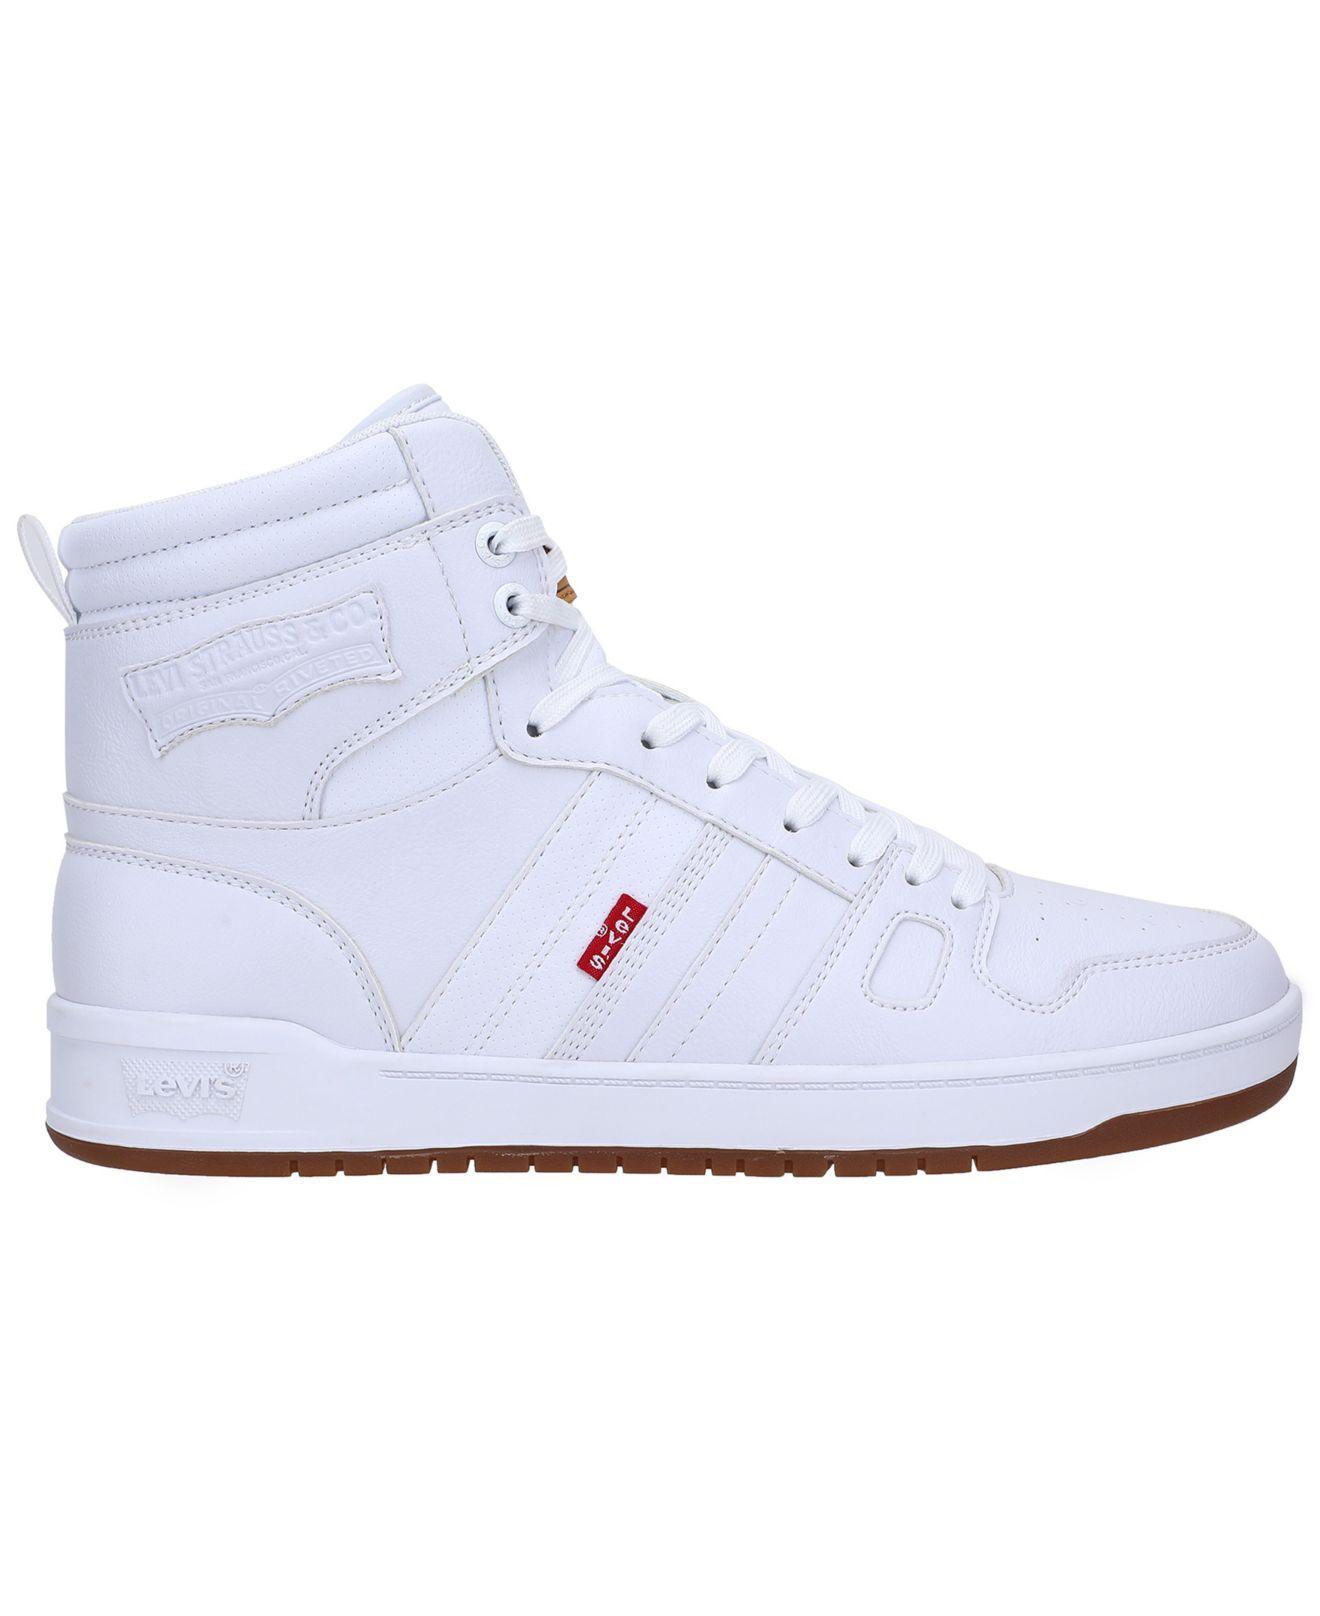 Levi's 521 High-top Pebbled Basketball Shoes in White for Men - Lyst